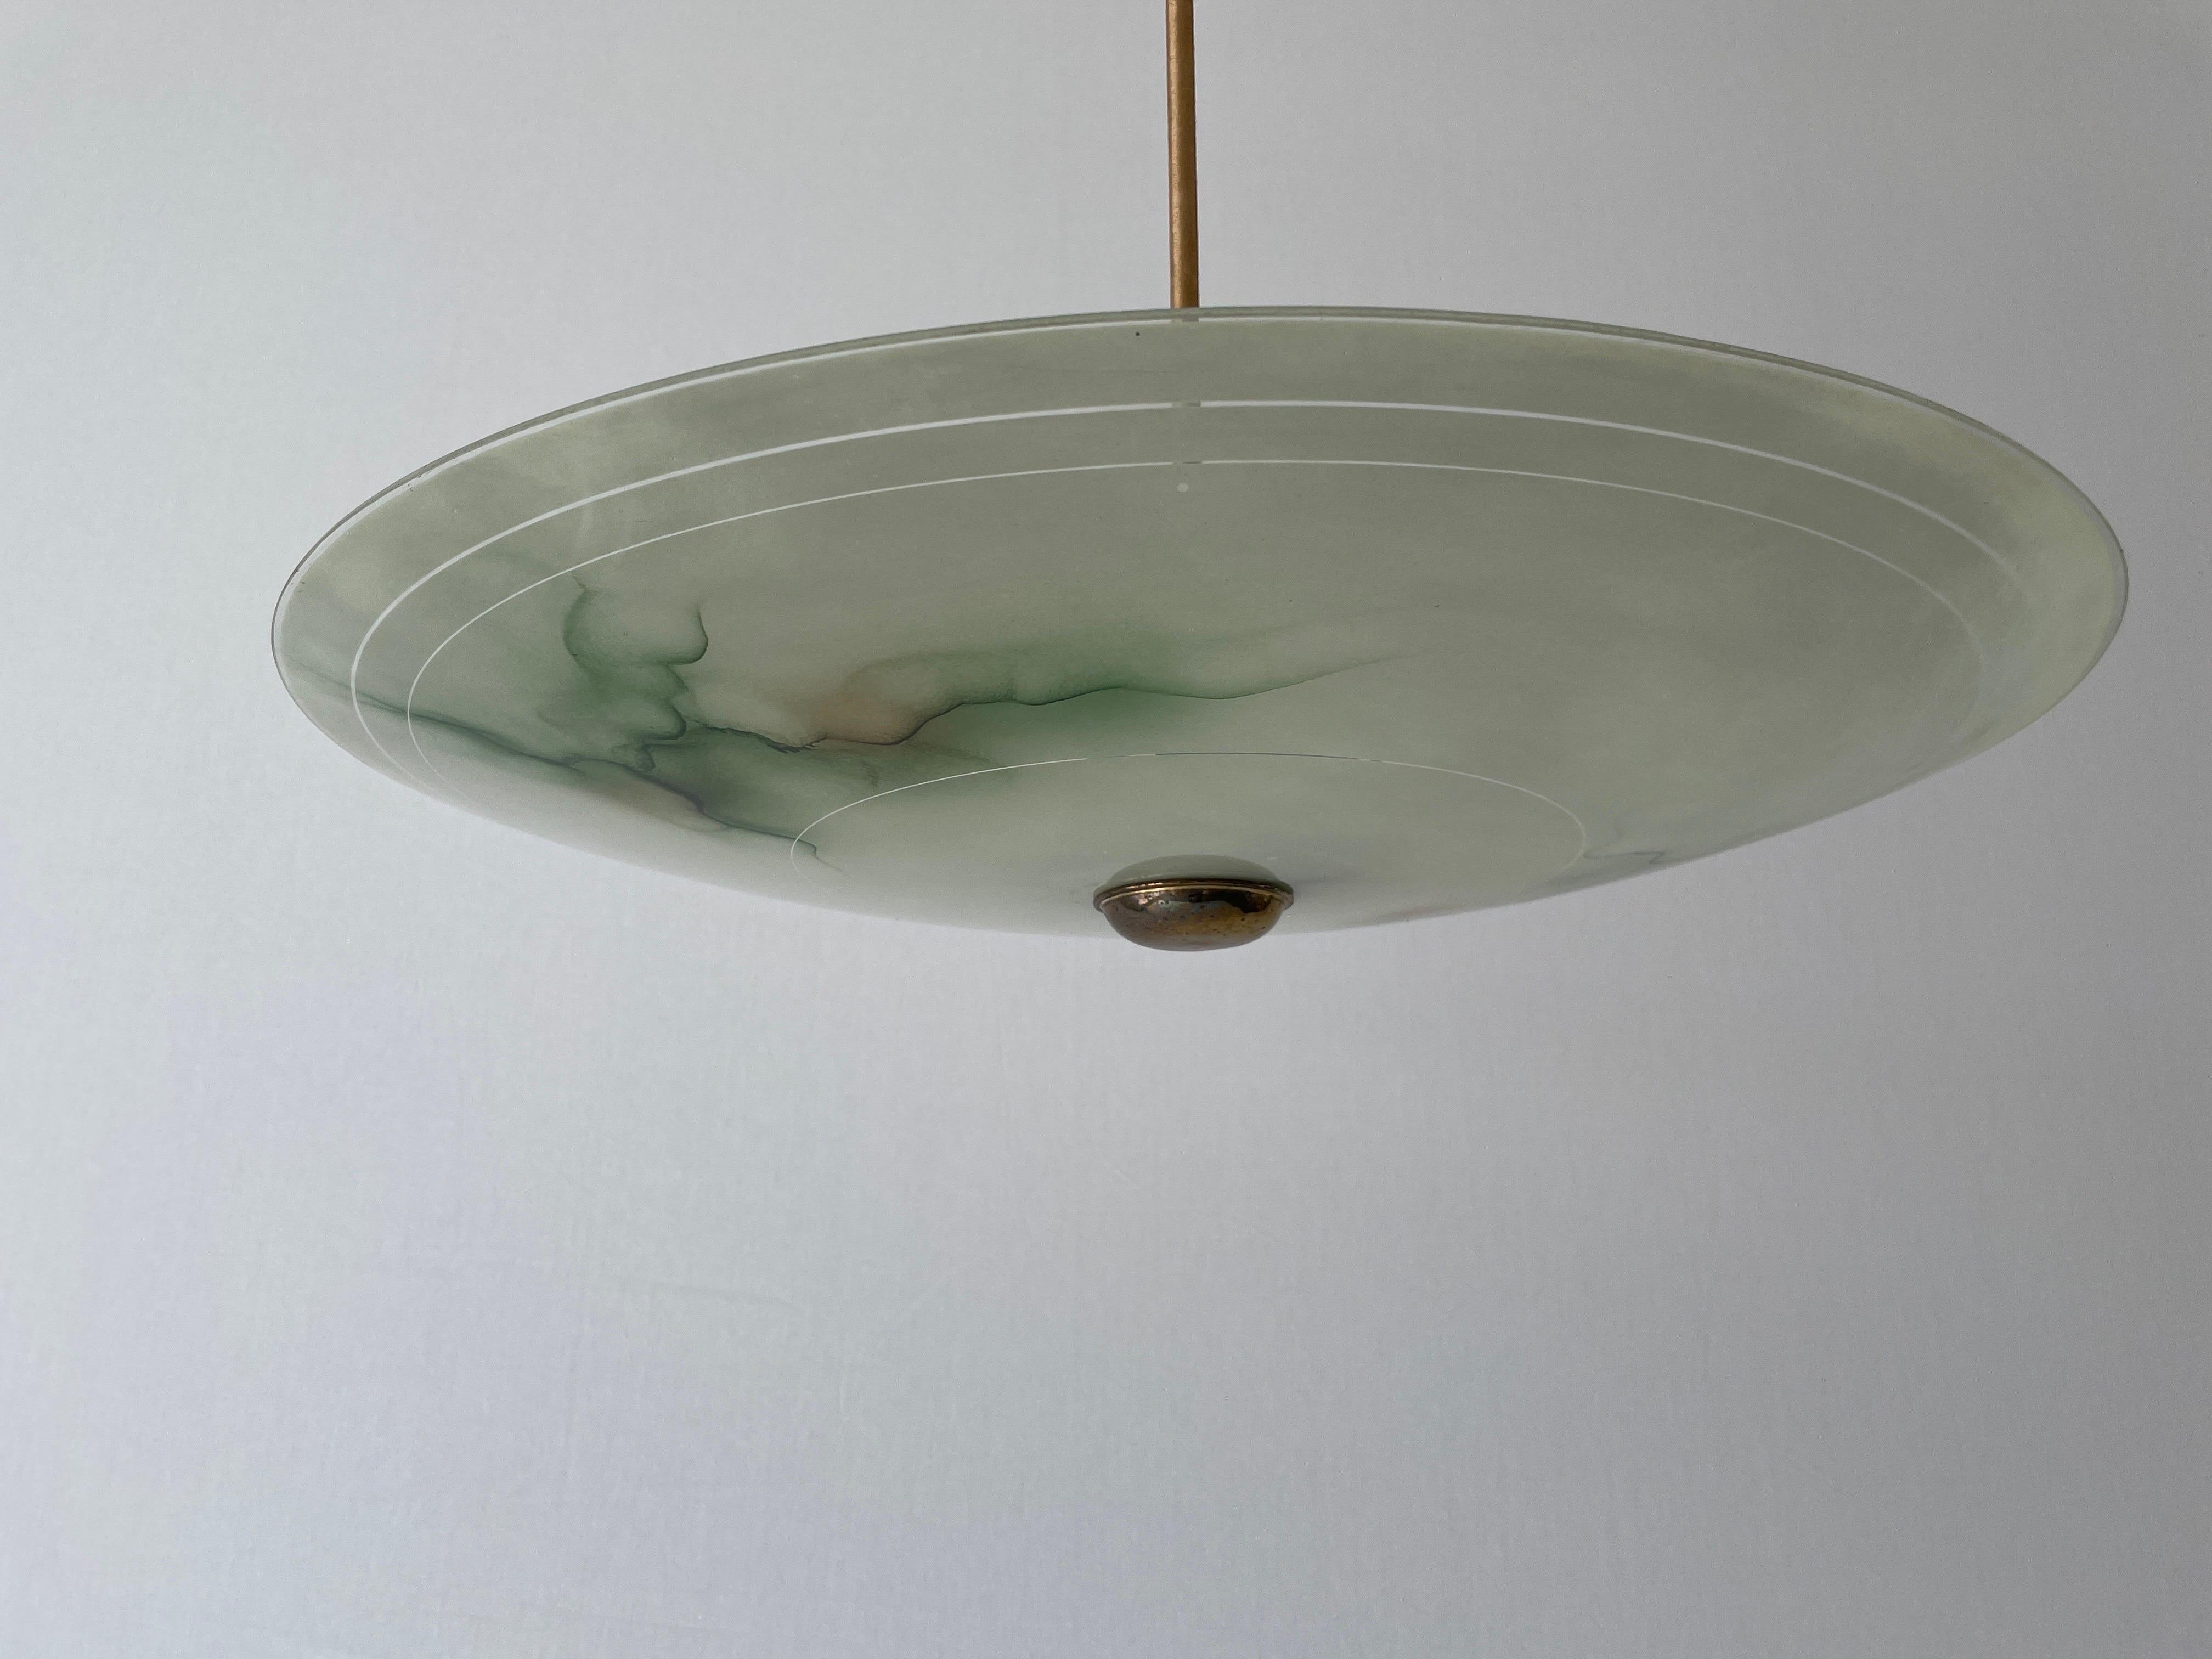 Art Deco Green Glass Ceiling Lamp, 1940s, Germany

This lamp works with 2x E27 light bulbs.

Measurements: 
Height: 50 cm
Shade diameter and height: 55 cm and 8 cm


